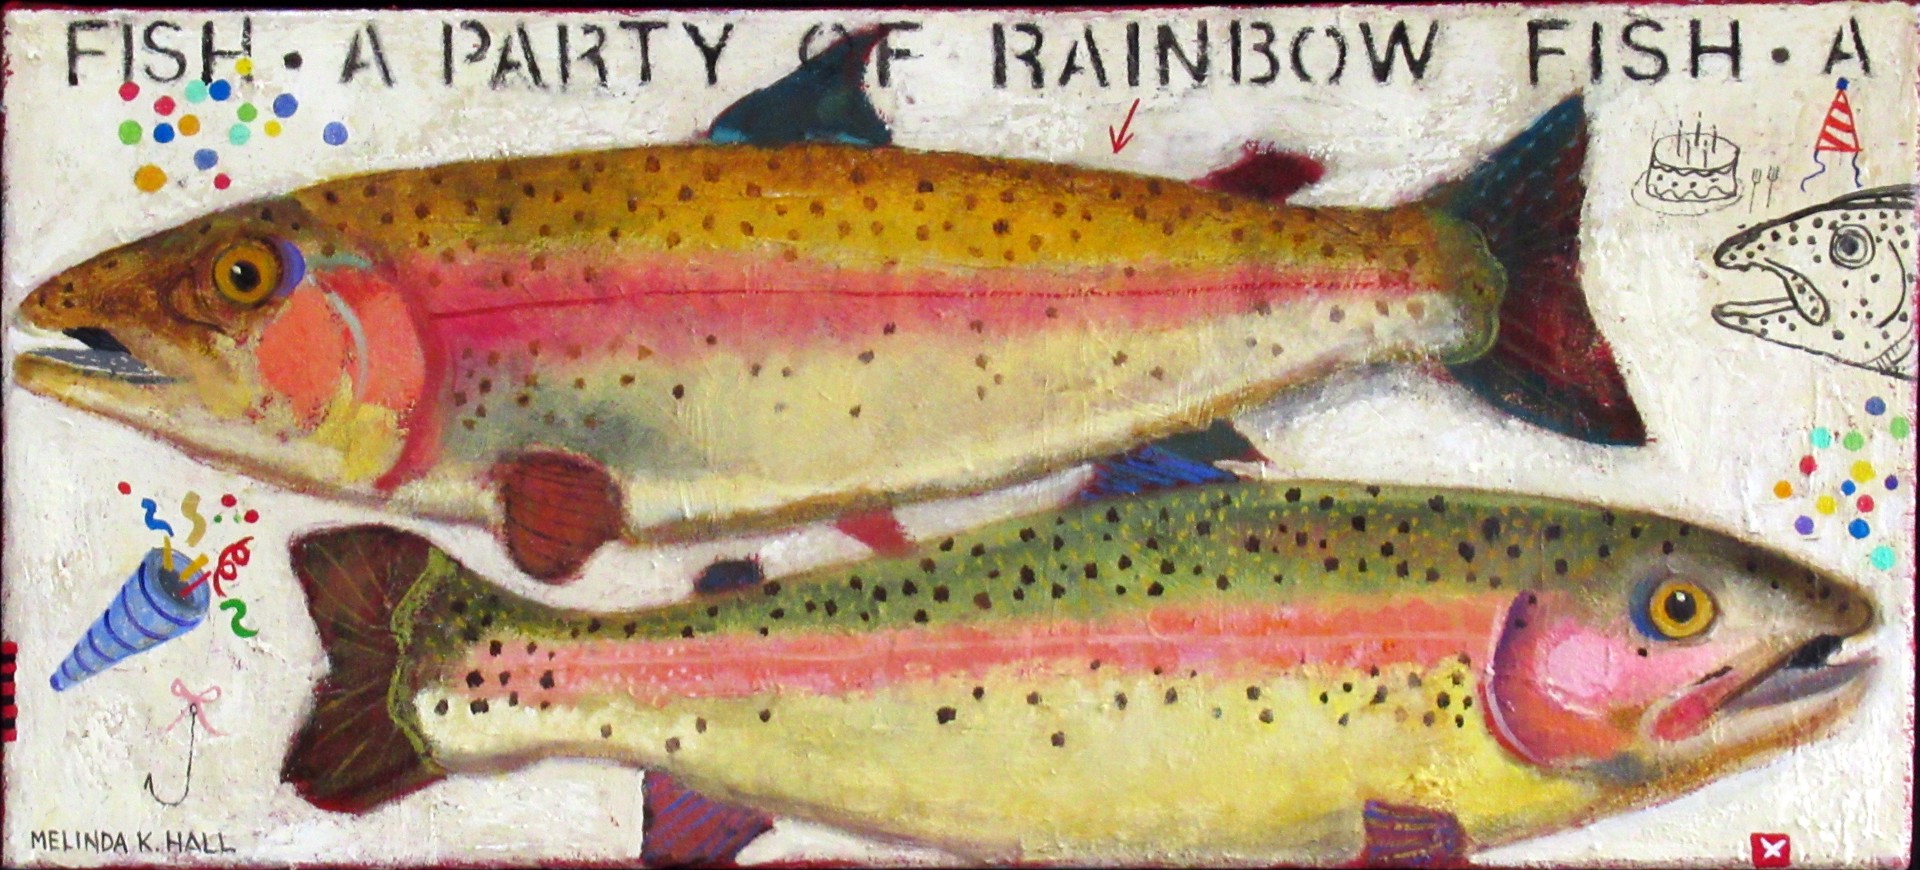 A Party of Rainbow Fish by Melinda K. Hall